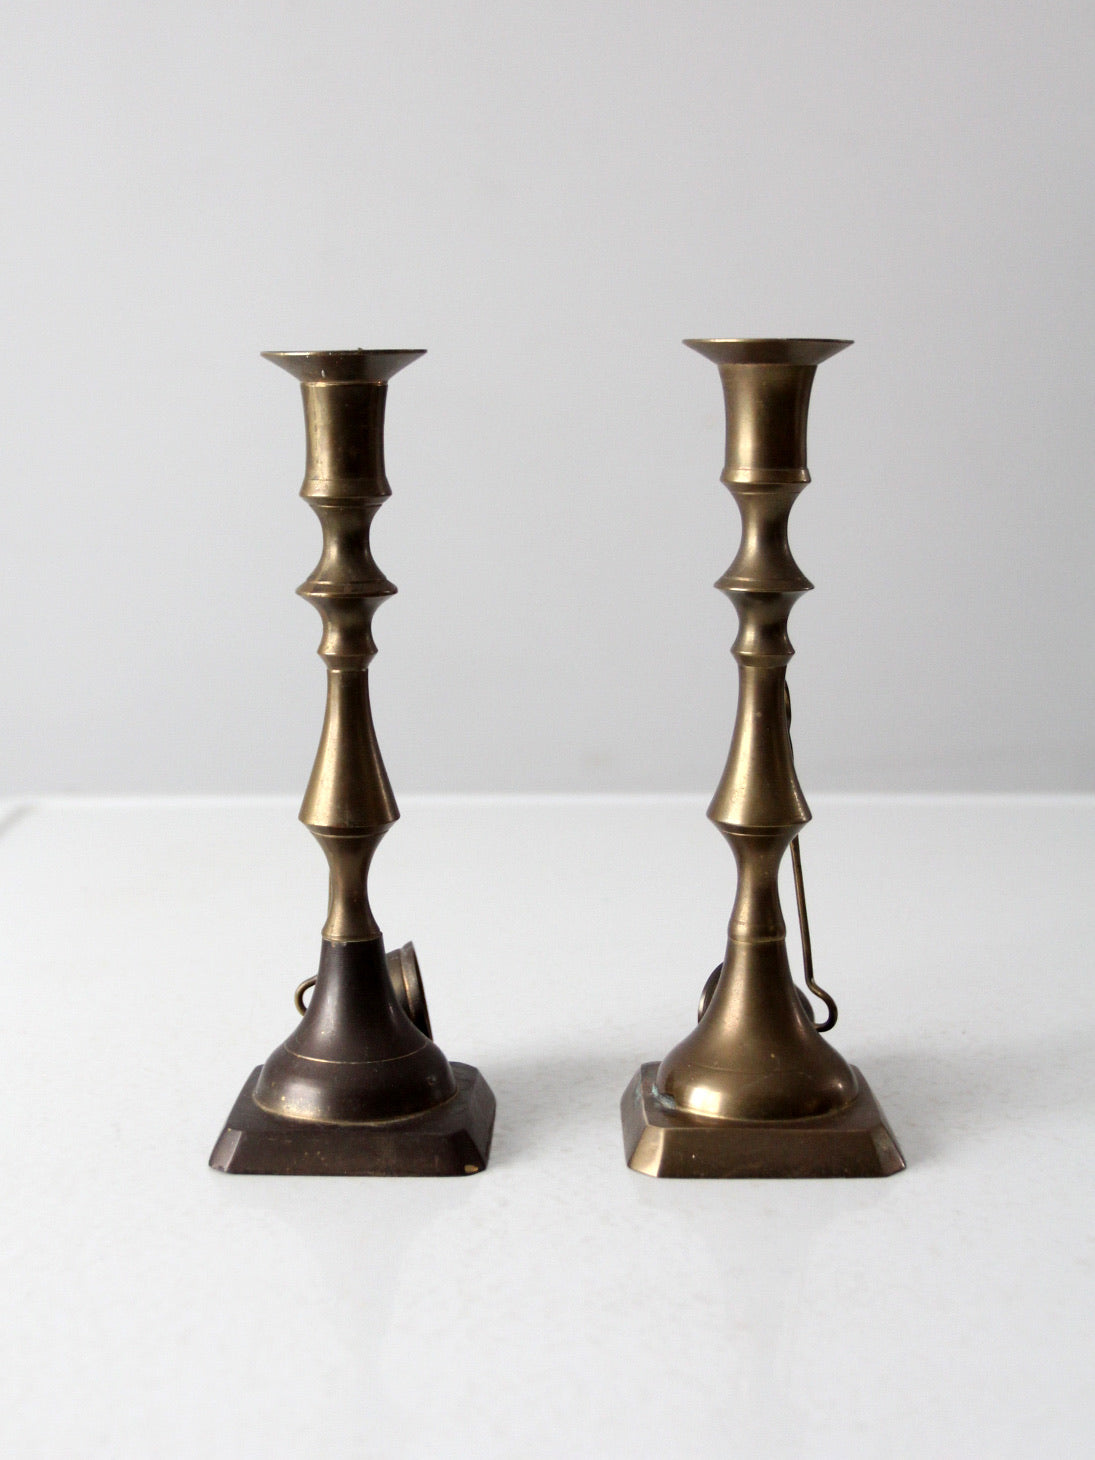 antique brass candlestick holders pair with hanging snuffers